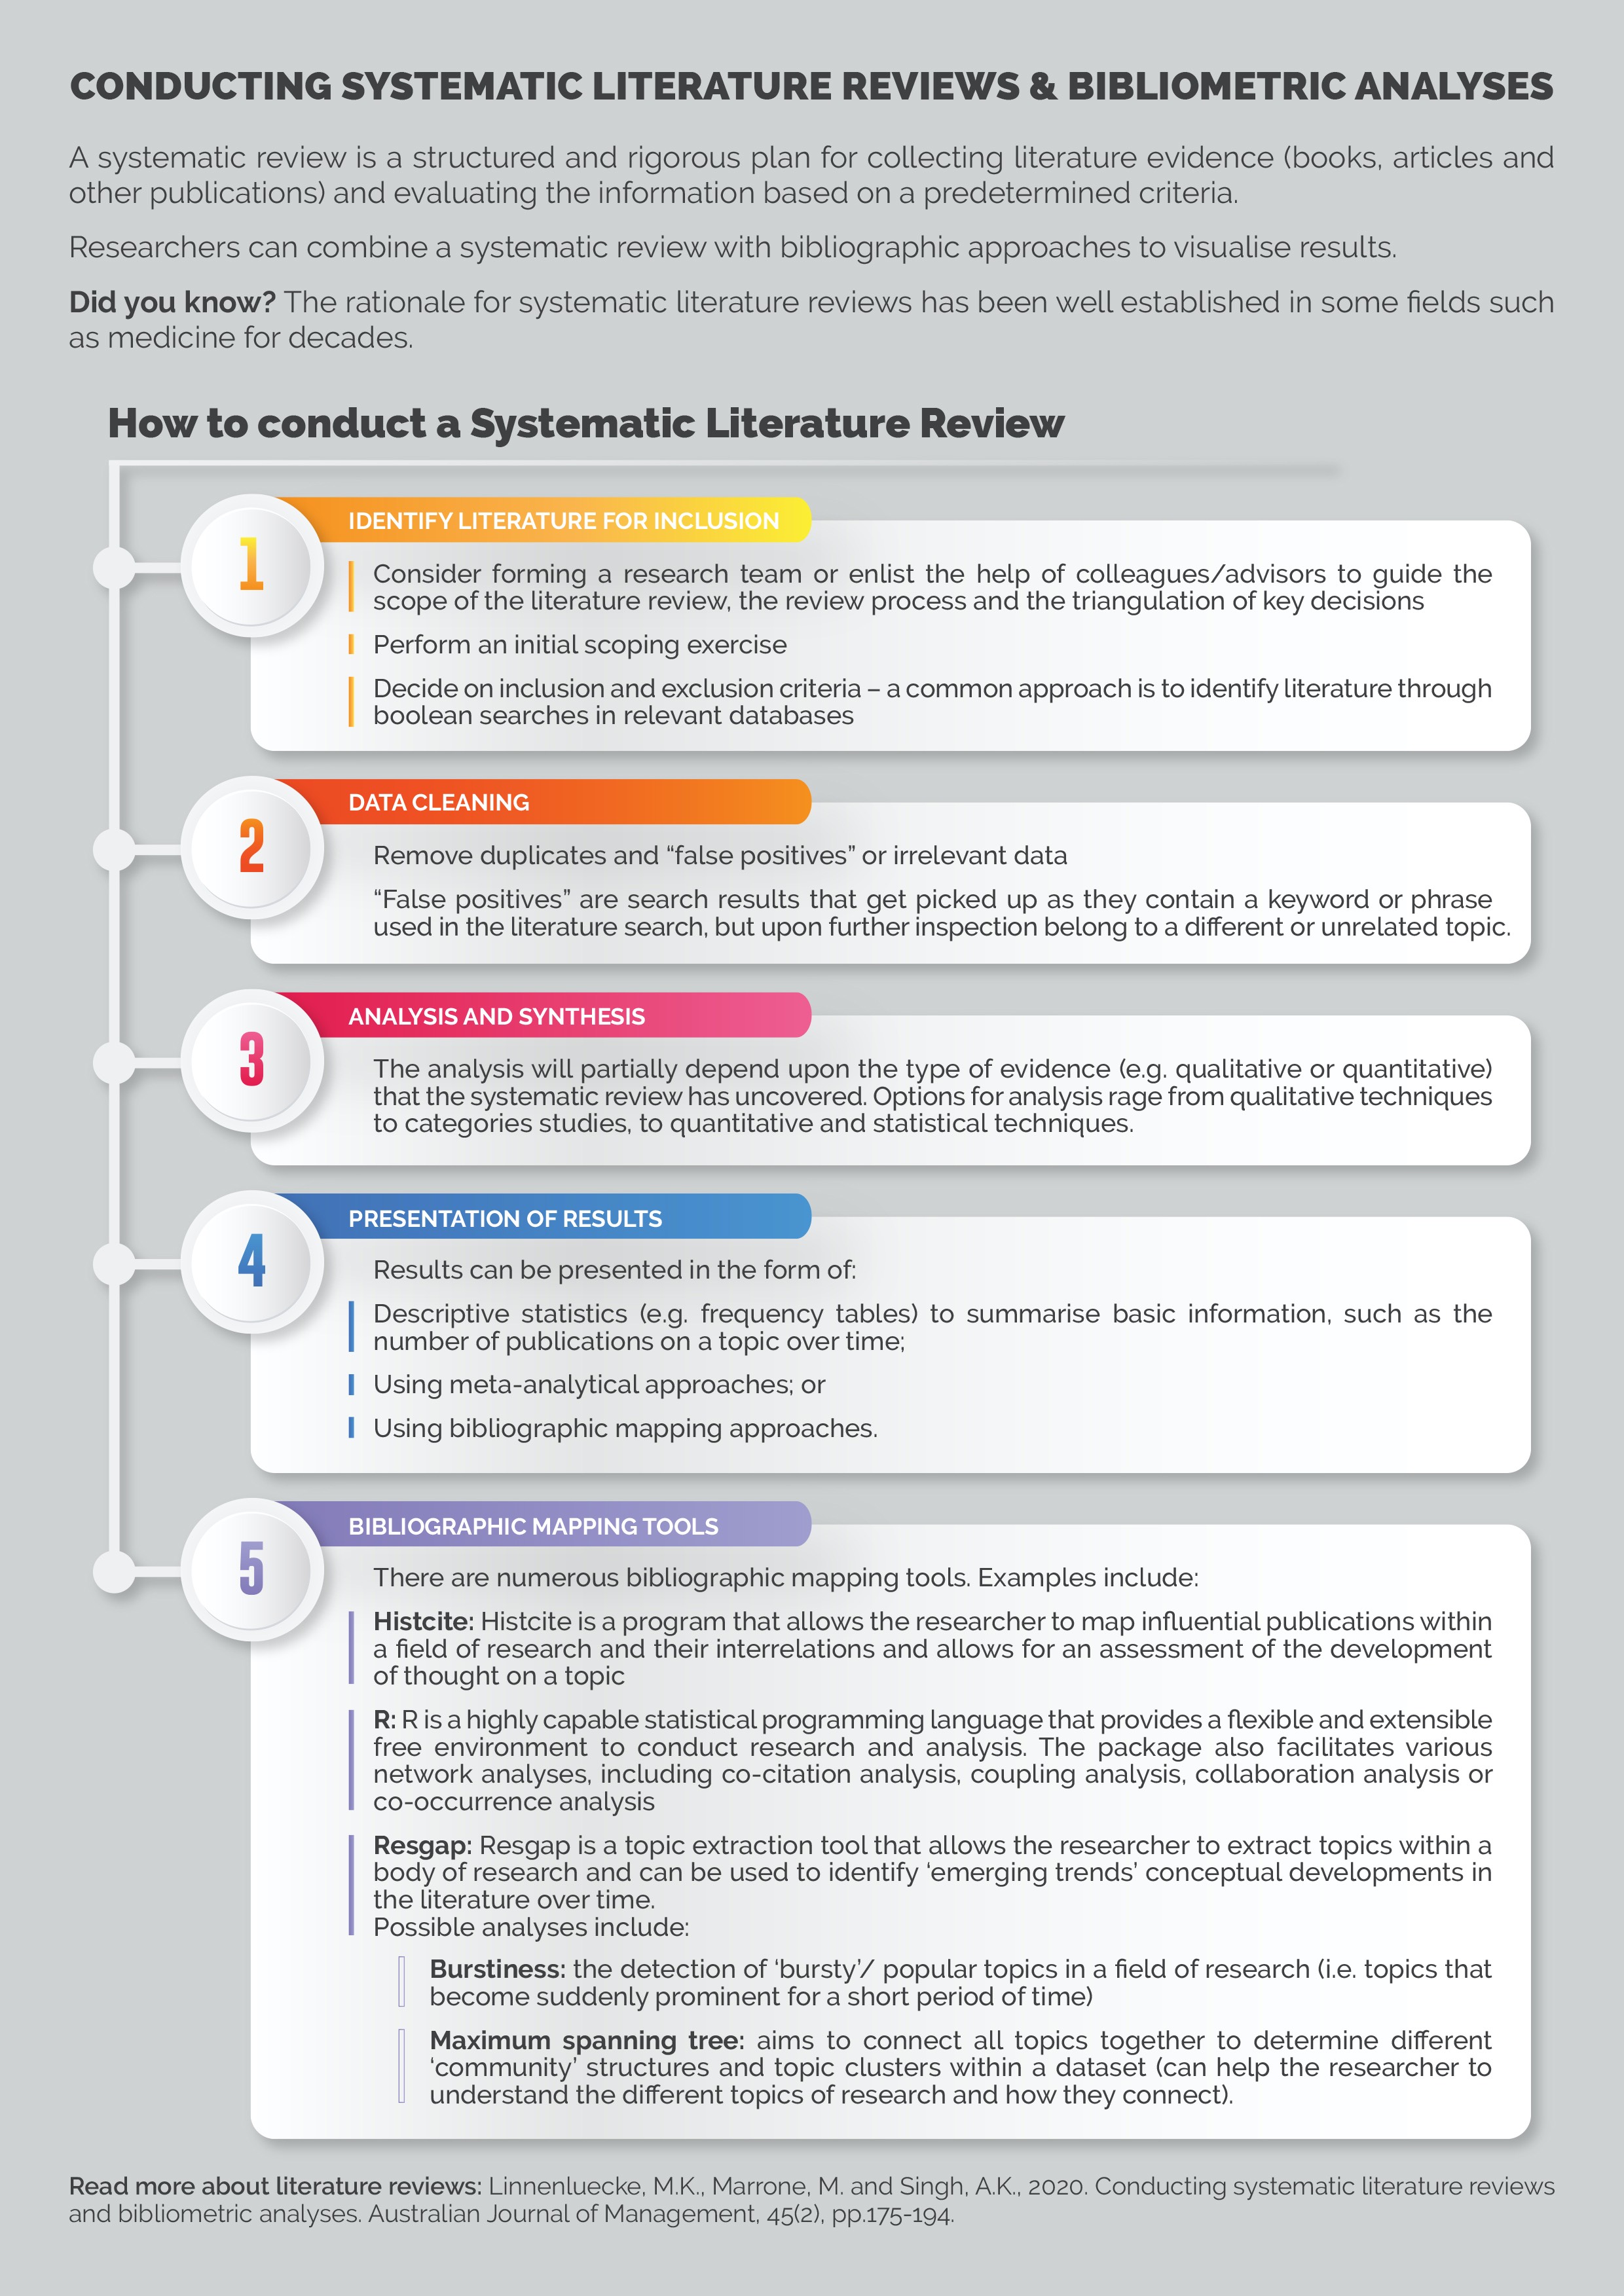 methodology on how to conduct a systematic literature review